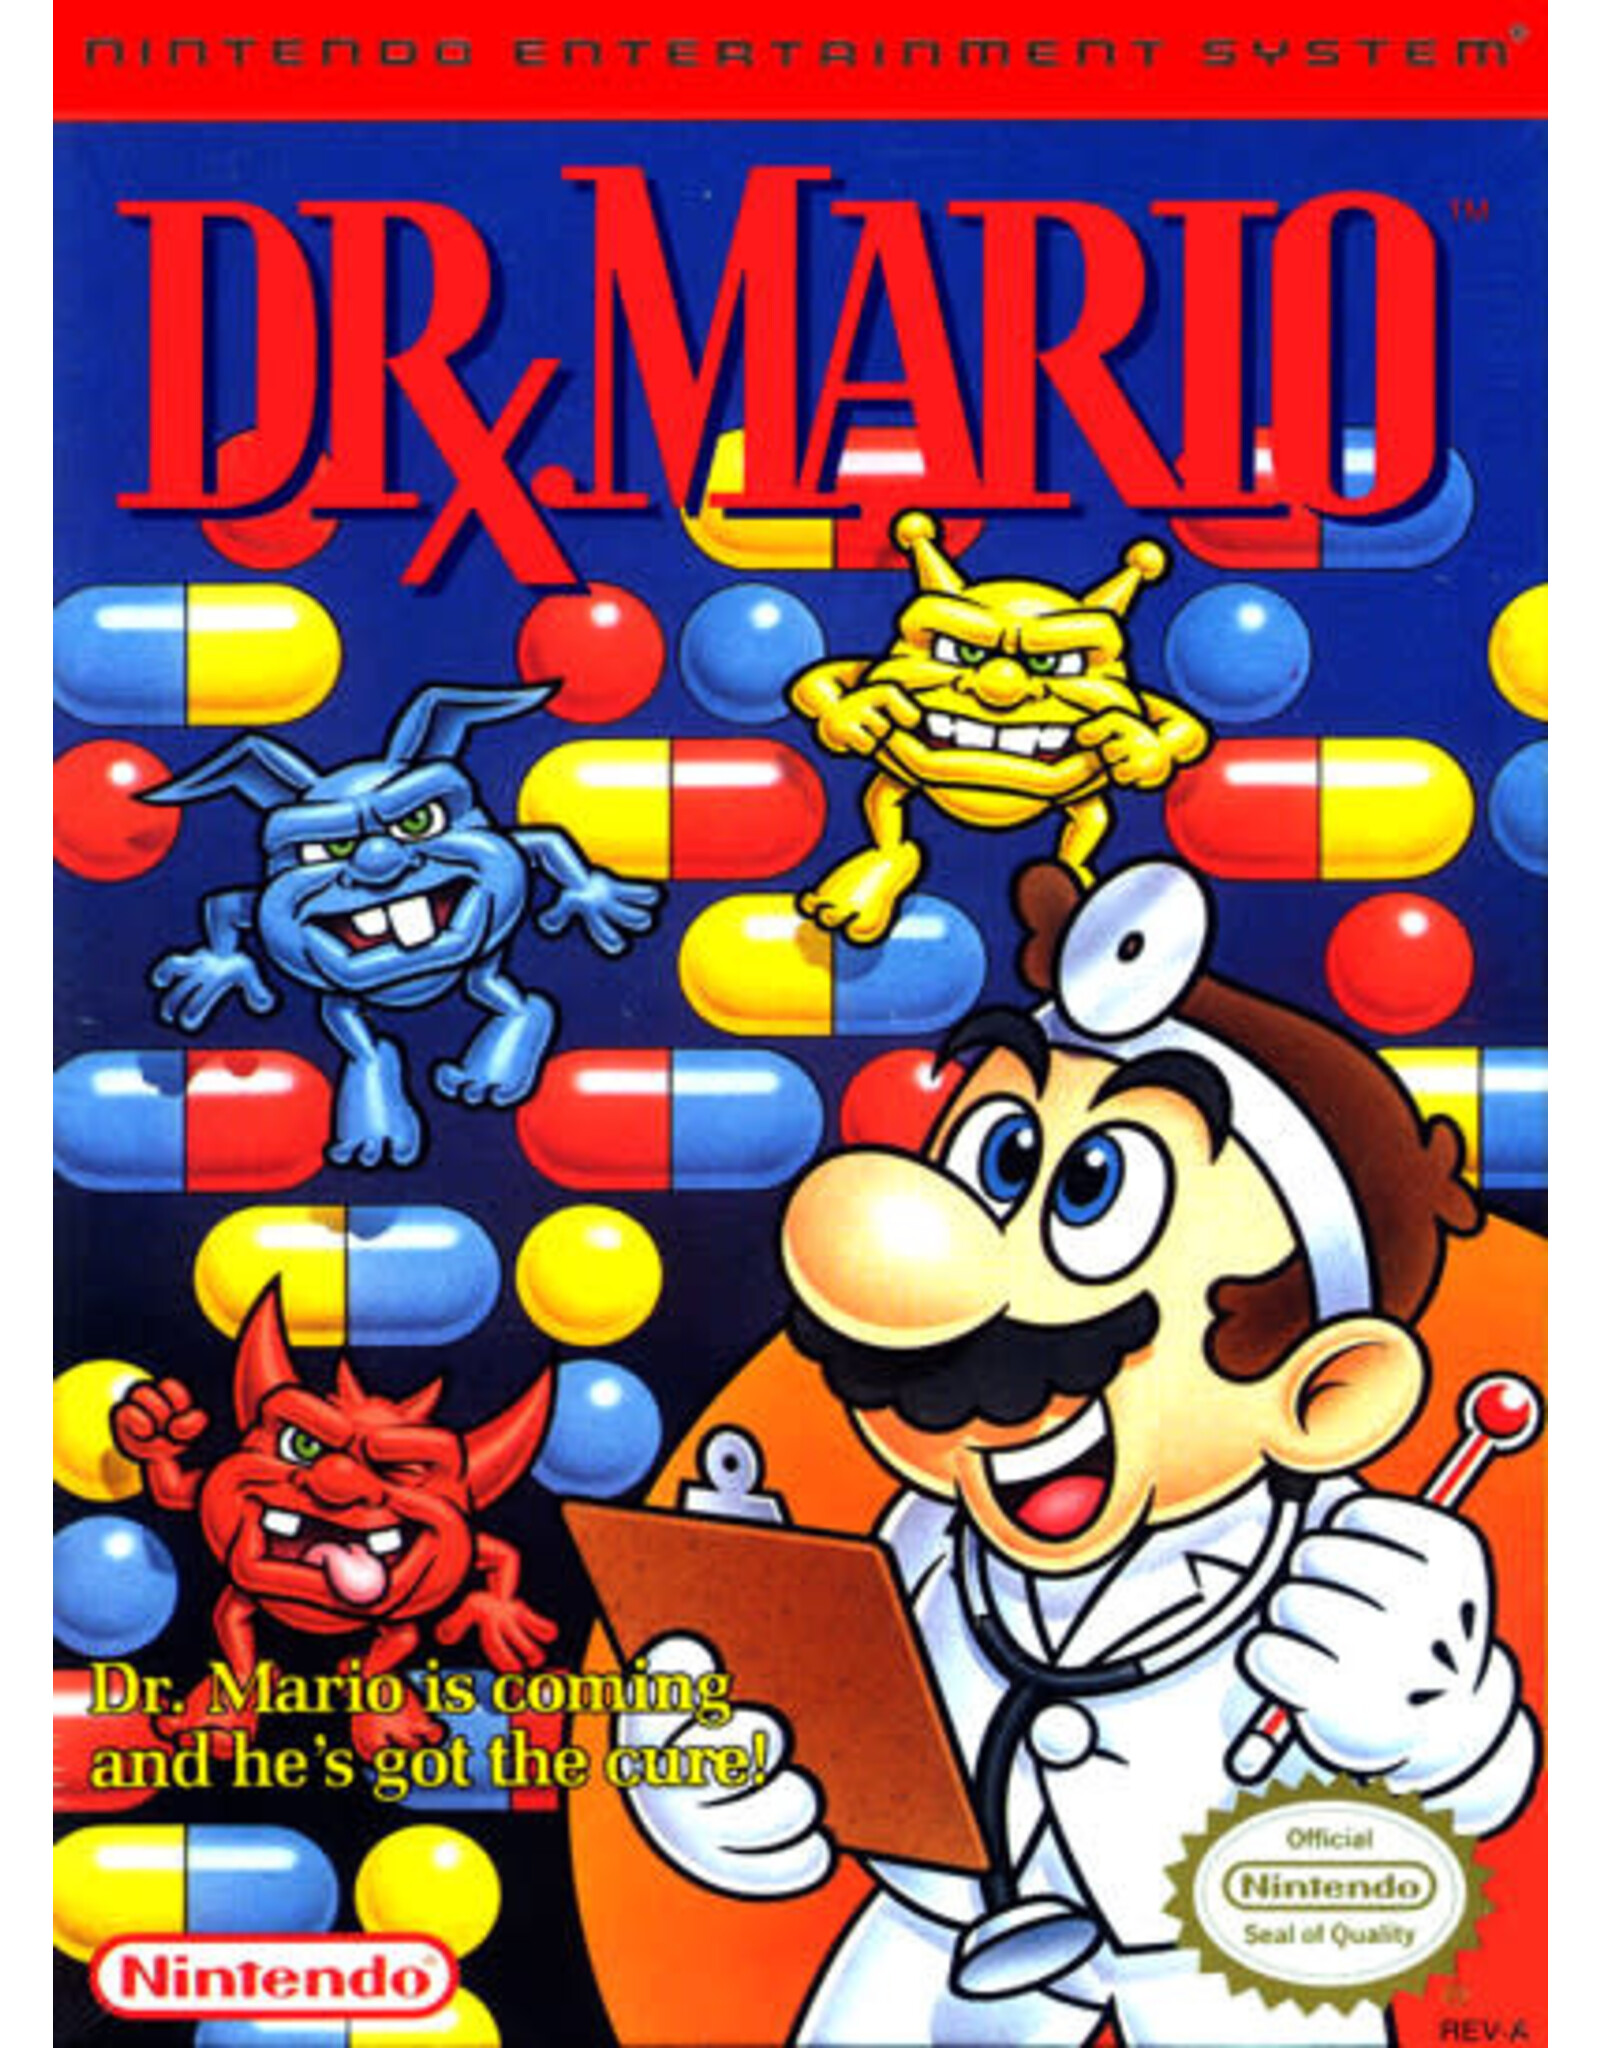 NES Dr. Mario (Used, Cosmetic Damage)